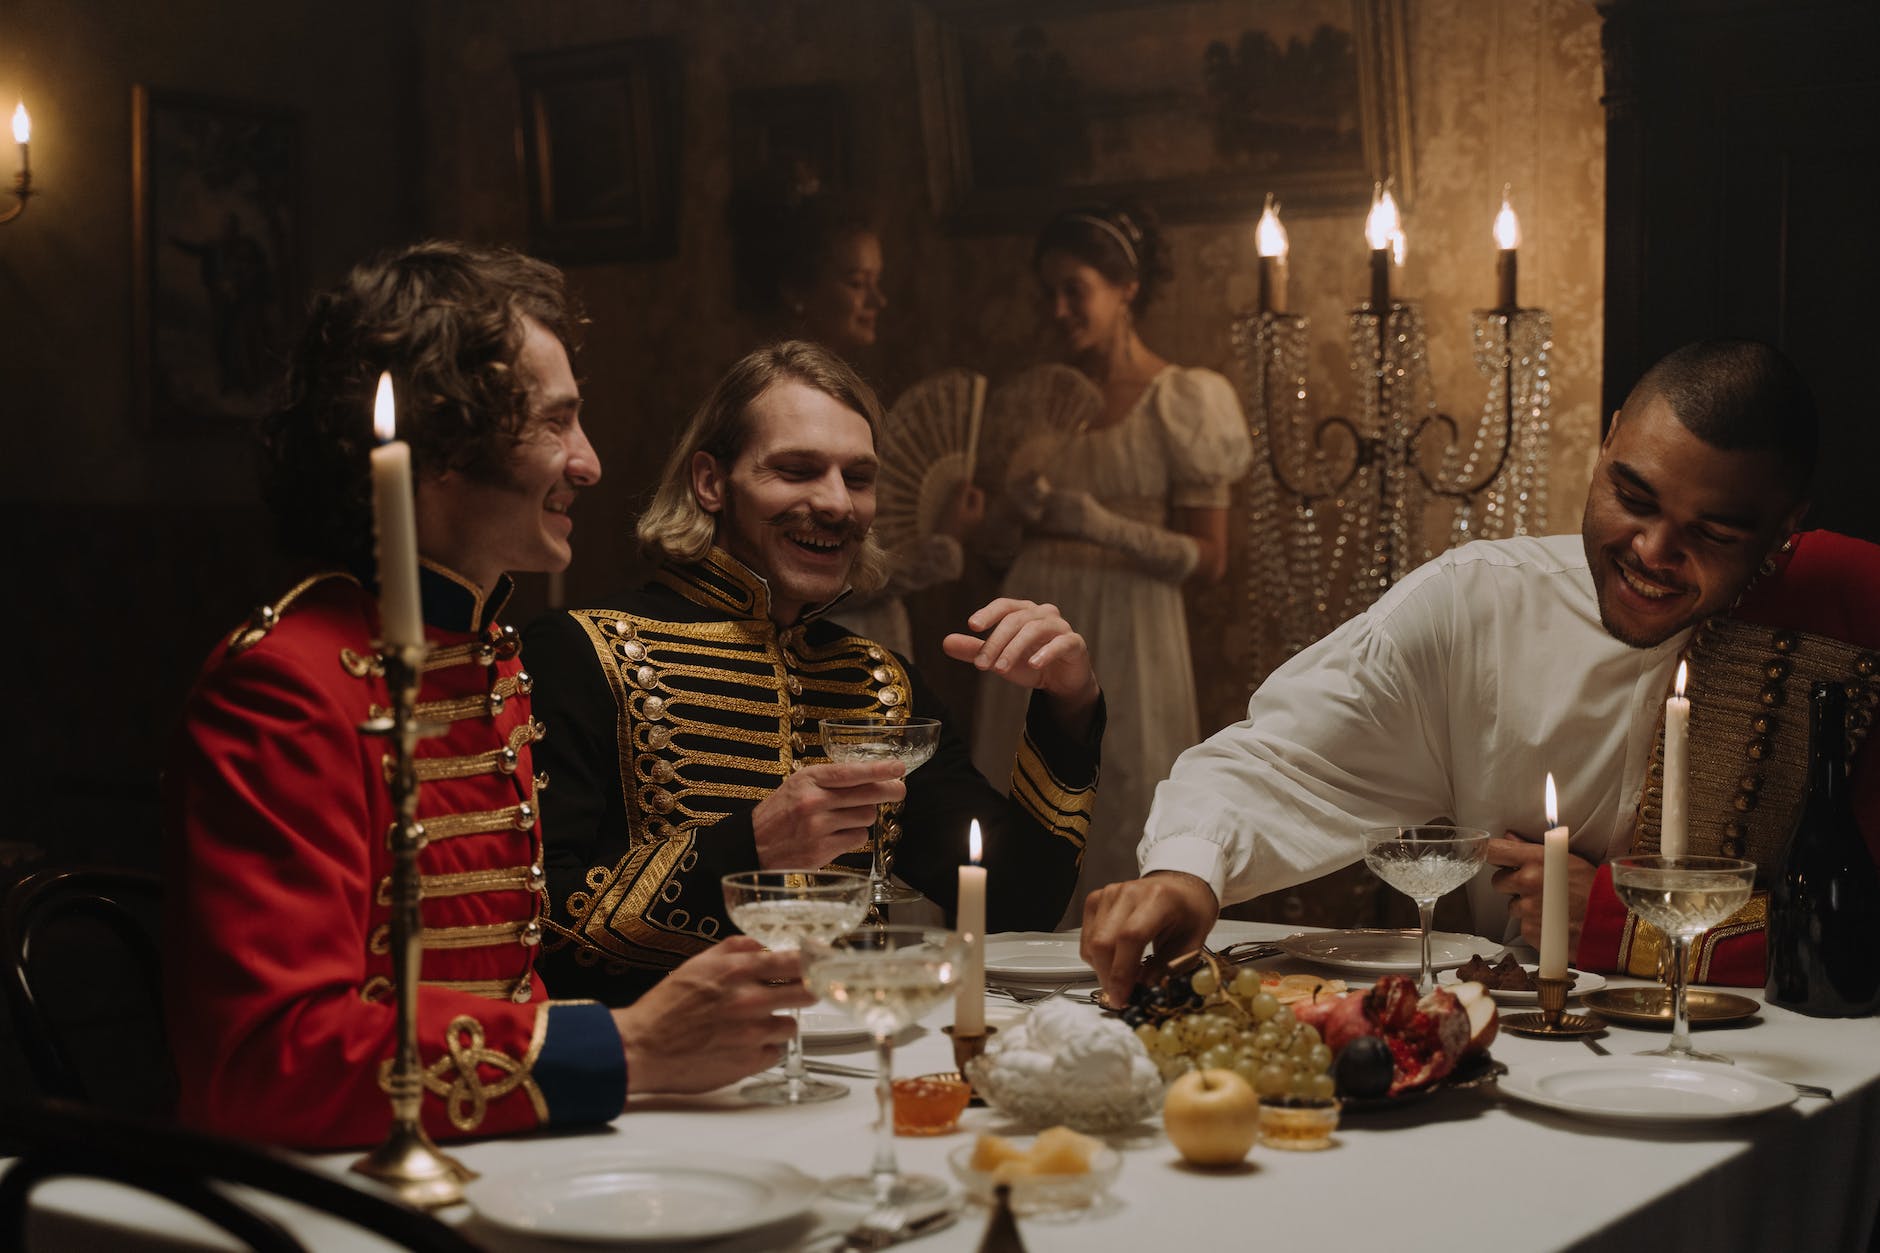 men in british military costumes sitting by the table having a feast